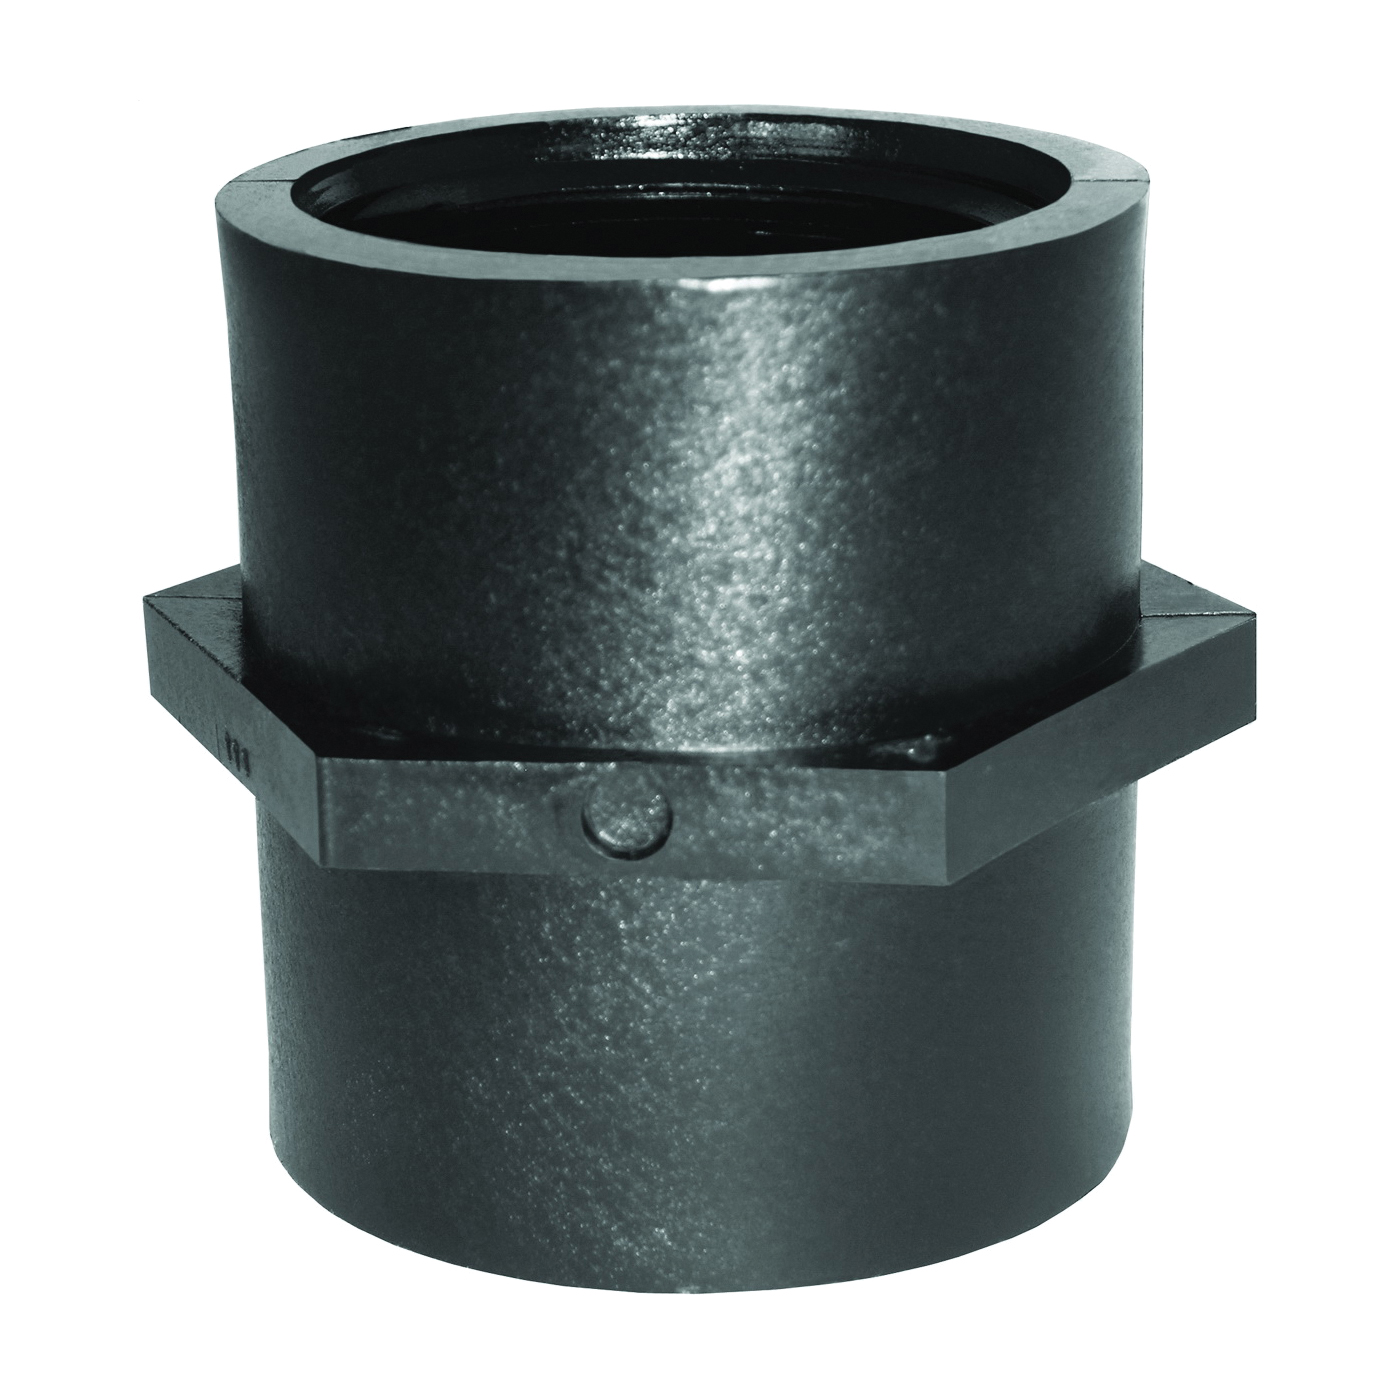 FTC 34 P Pipe Coupling, 3/4 in, Female NPT